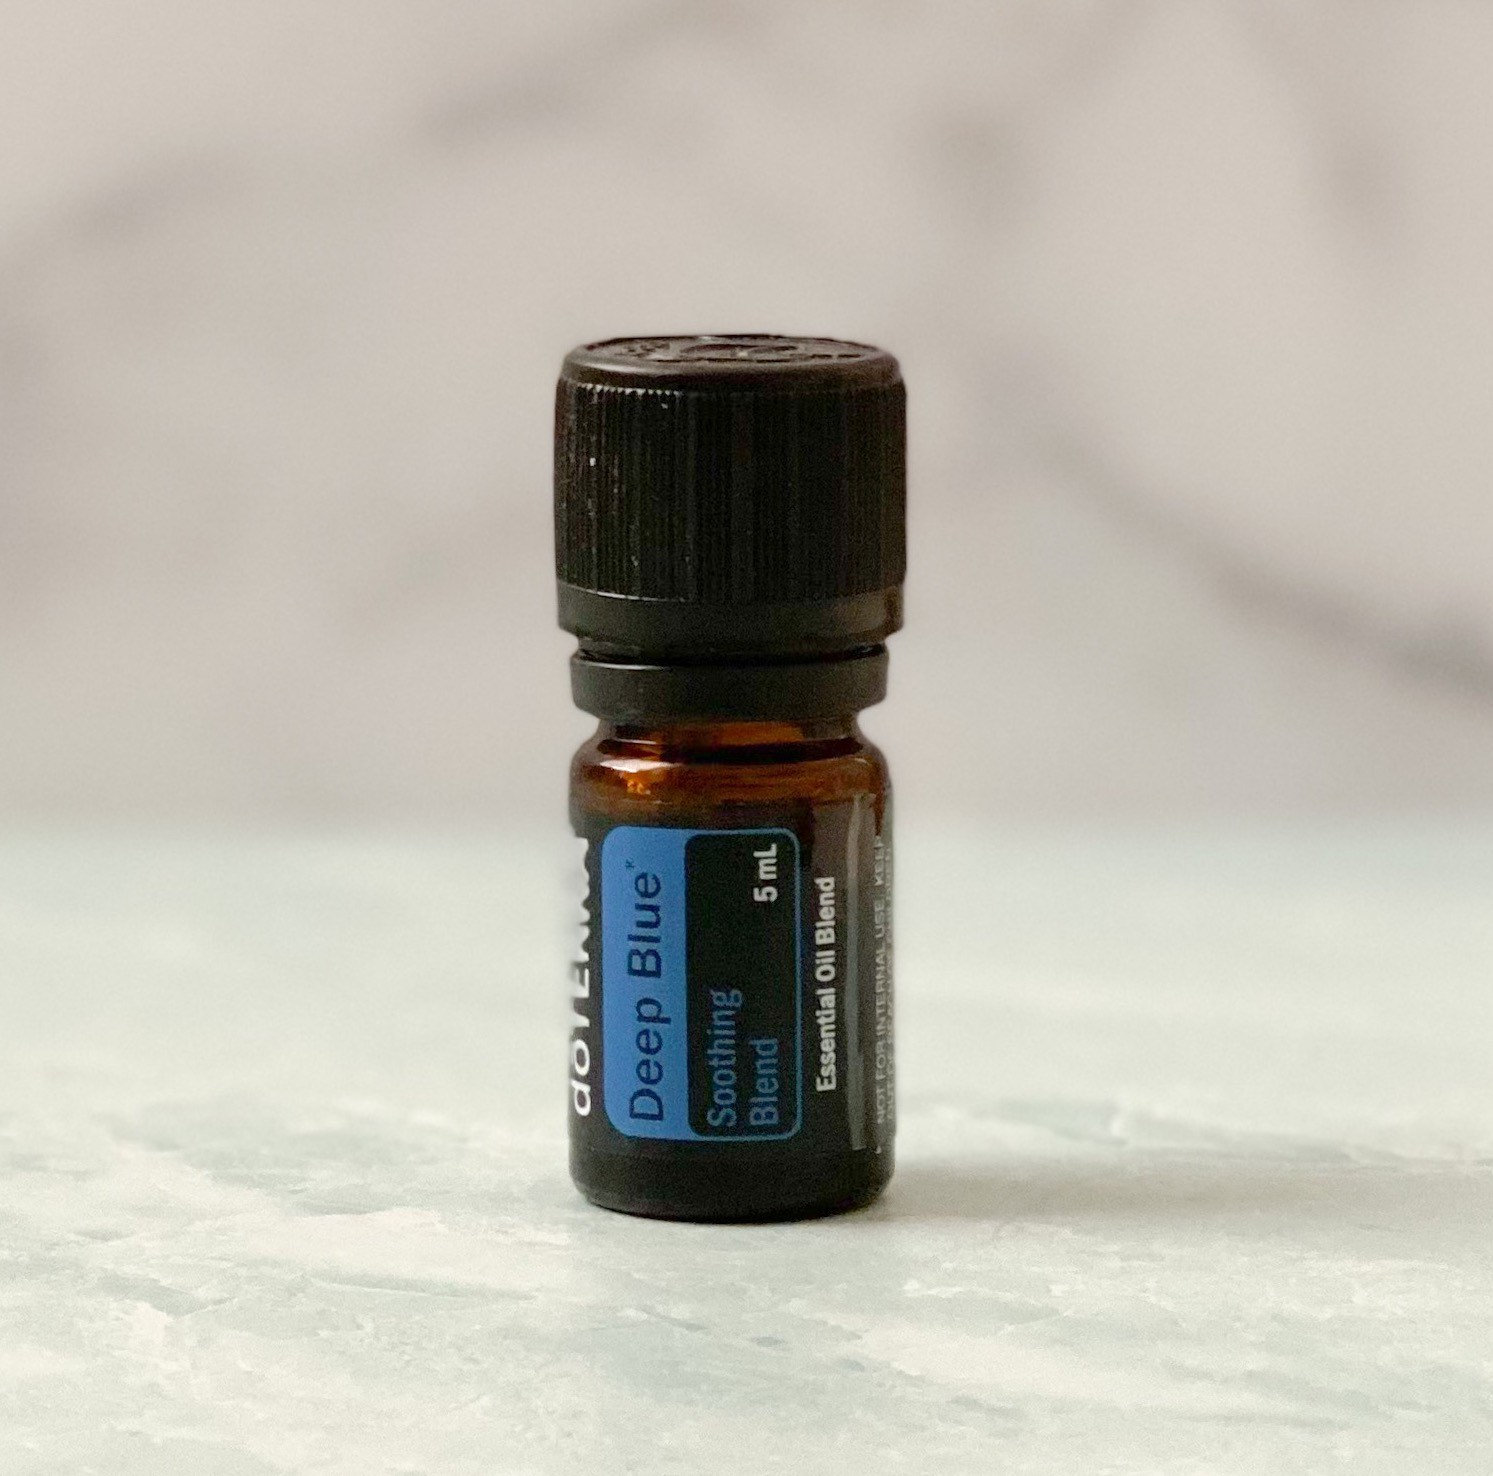 Deep Blue Essential Oil Blend | Doterra Muscle Pains & Aches Tension Relief